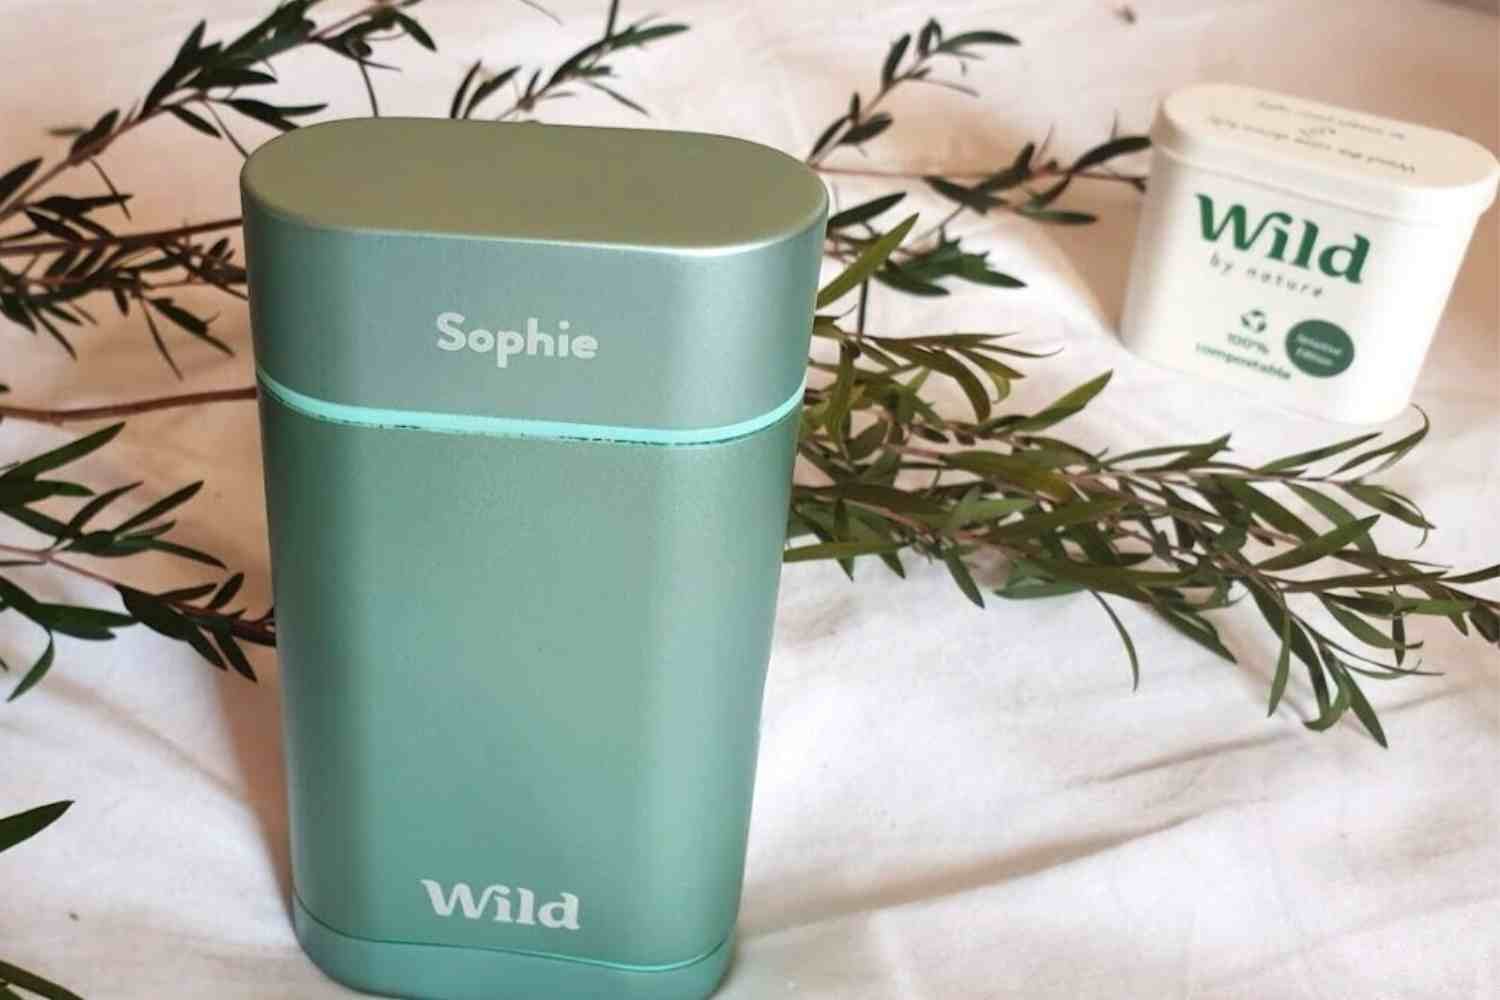 Wild deodorant review: Does Wild deodorant work, and is it worth it?